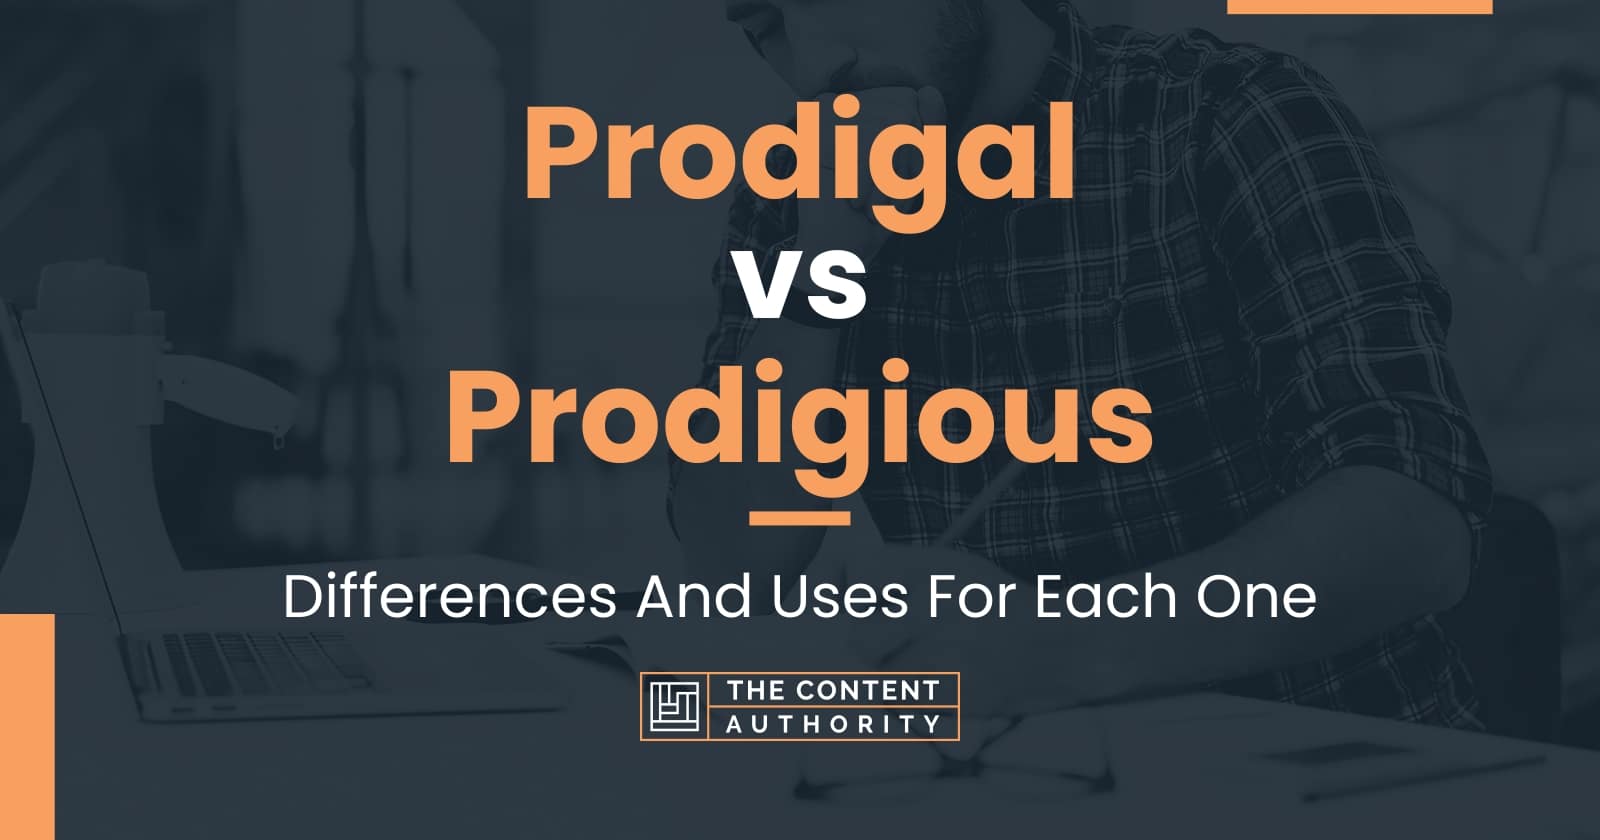 Prodigal vs Prodigious: Differences And Uses For Each One